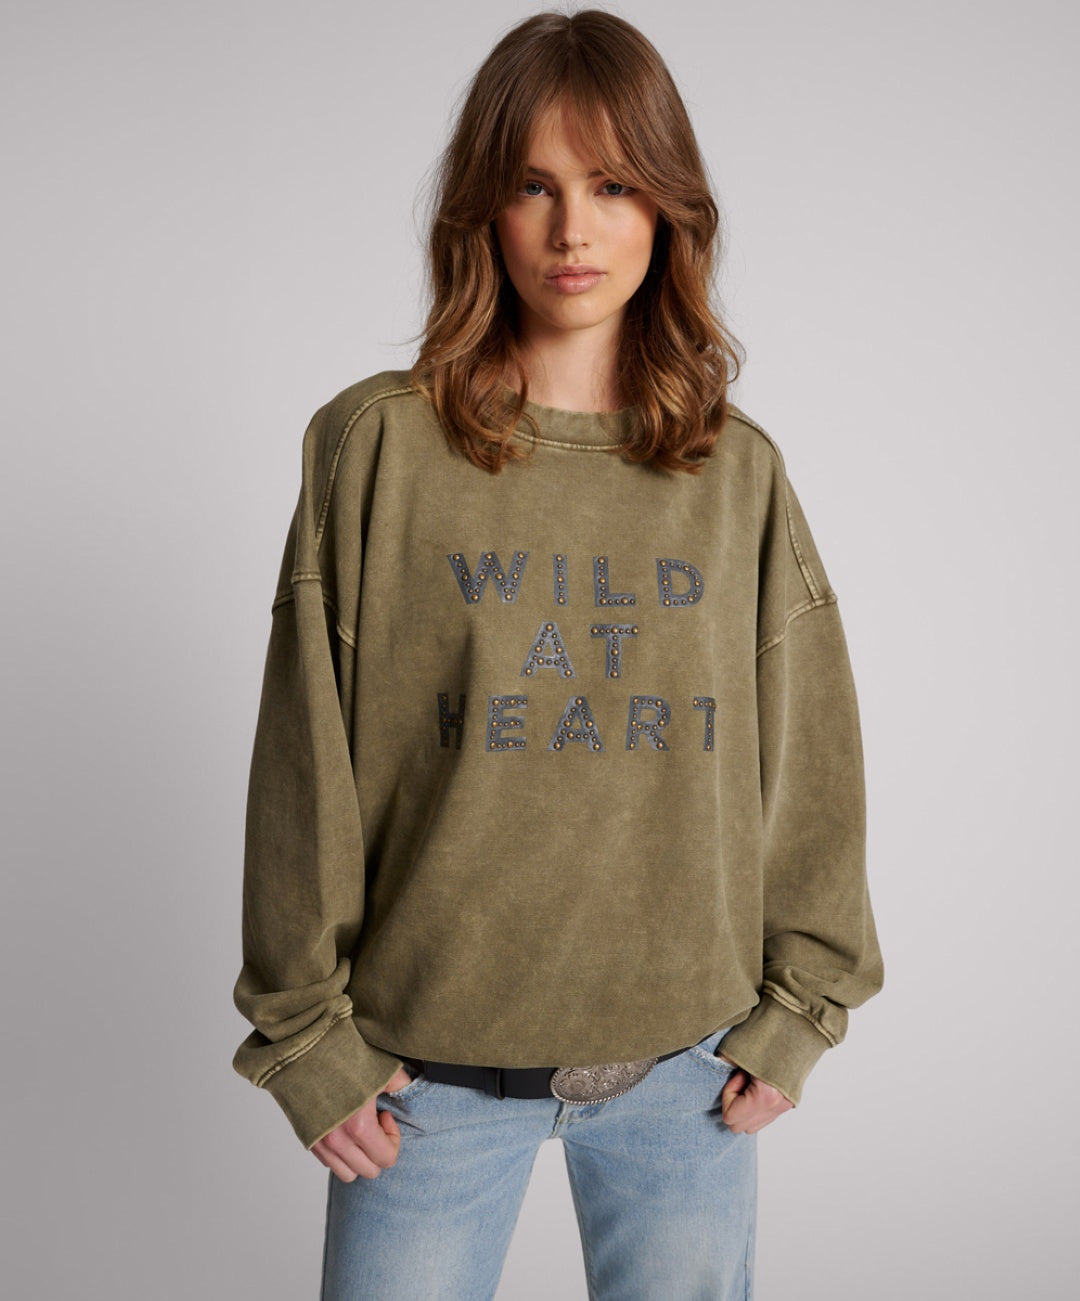 Wild at Heart Studded Retro Sweater by One Teaspoon